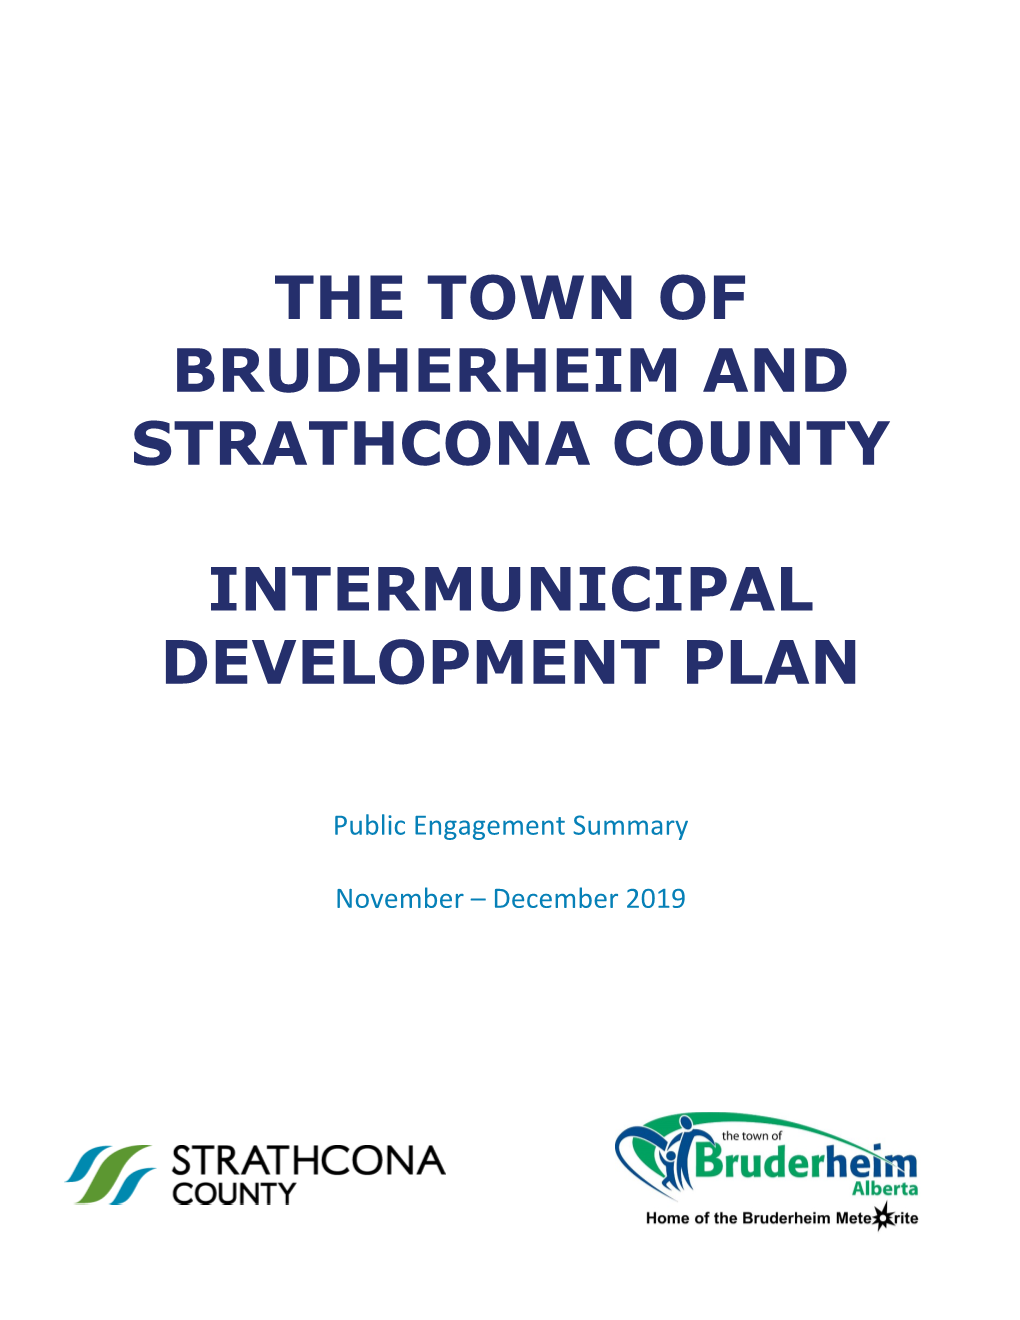 Town of Bruderheim and Strathcona County Public Engagement Summary